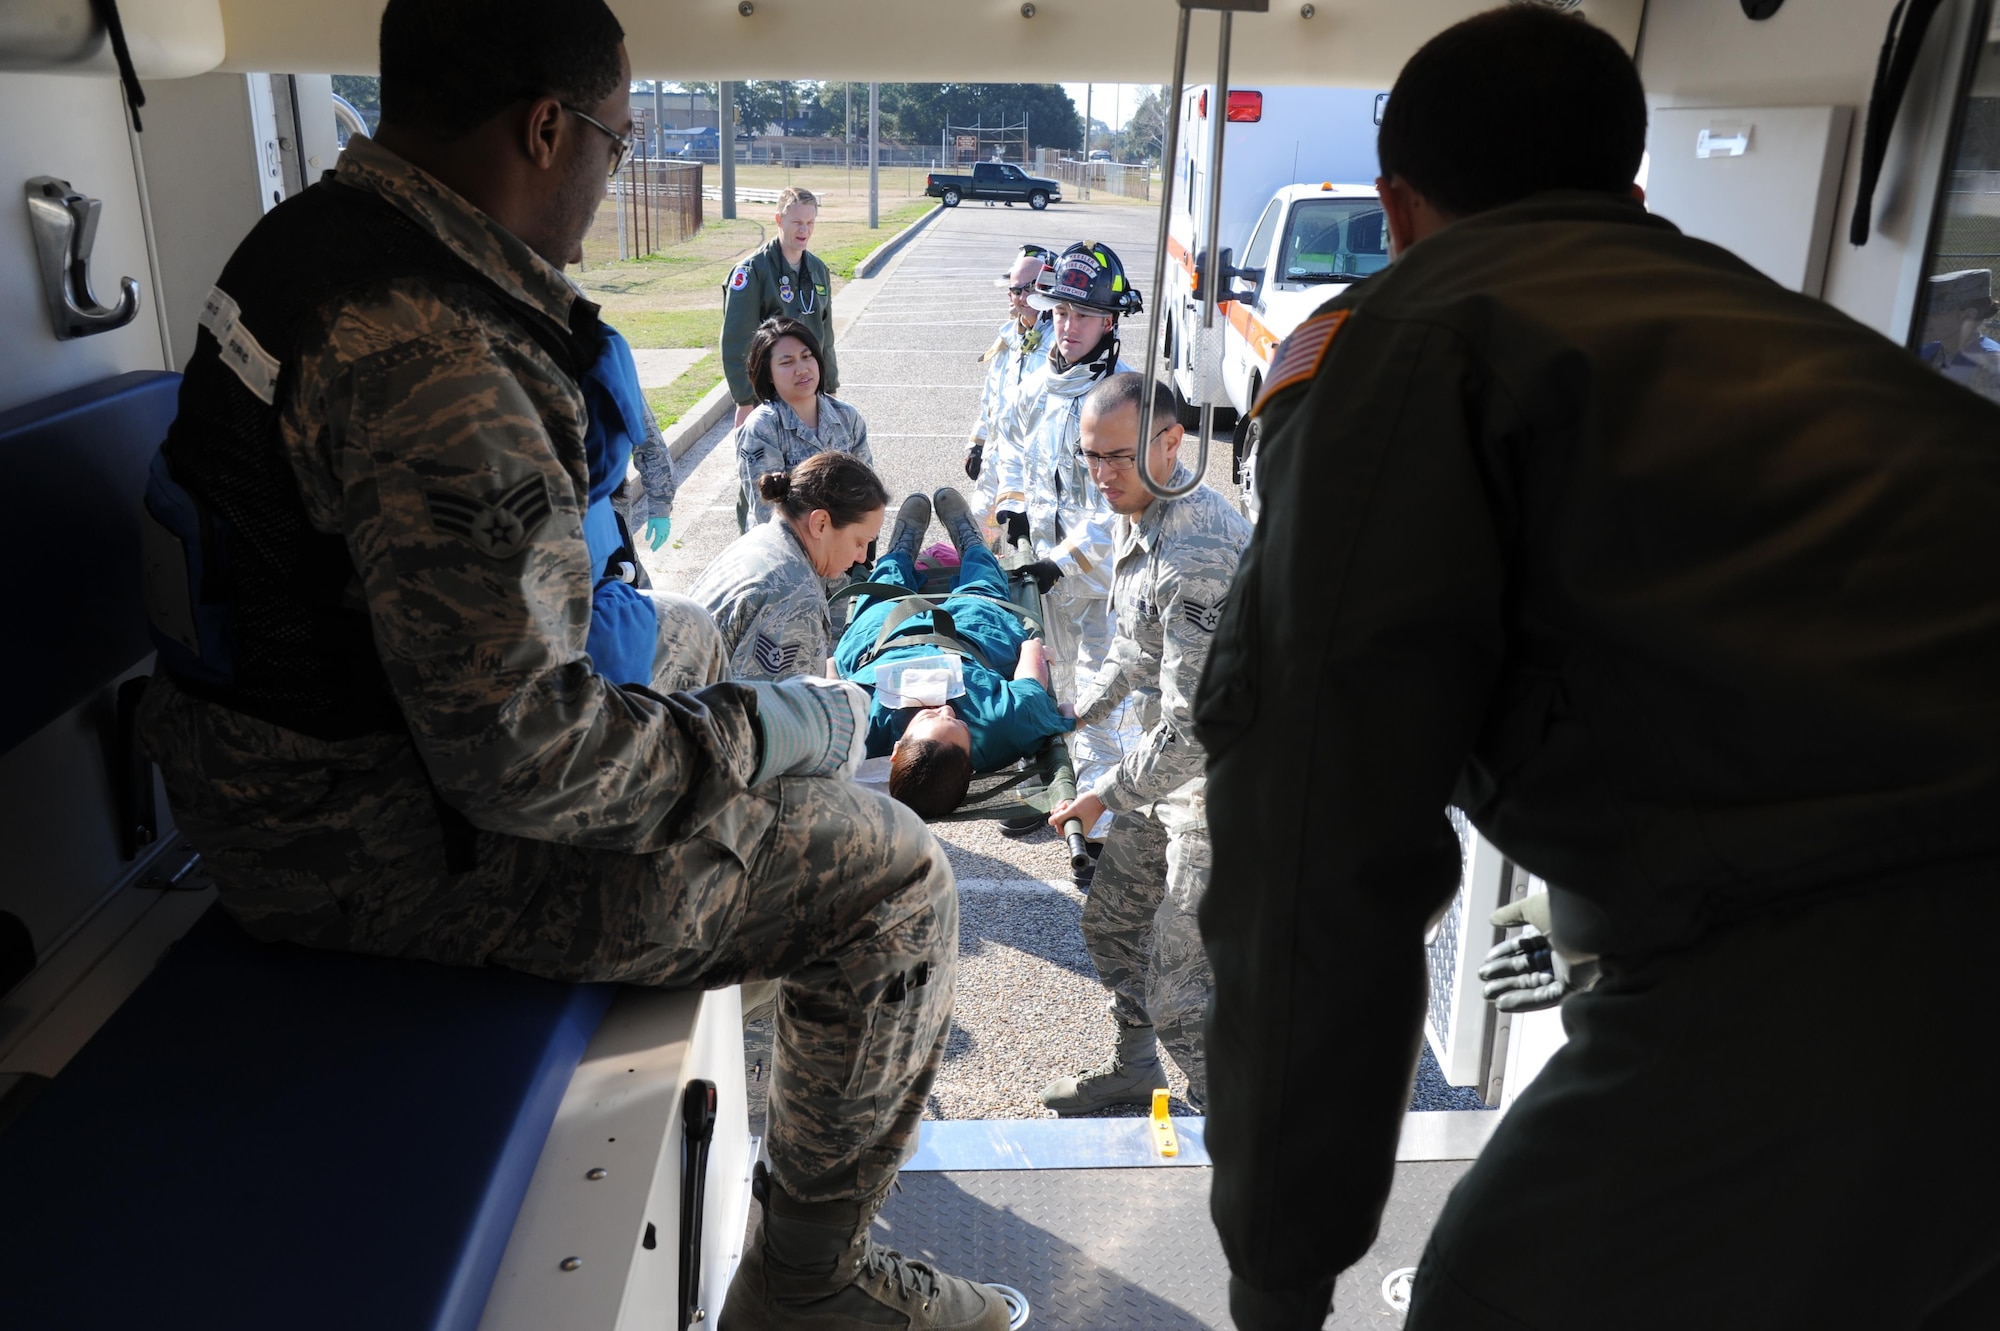 First responders work together to load a simulated victim into an ambulance during a major accident response exercise on the flight line Feb. 12, 2015, on Keesler Air Force Base, Miss. The MARE simulated a C-130J Hercules aircraft crash on base and helped test the agility of Keesler emergency room personnel and first responders. Keesler’s emergency room, which is open 24/7, sees around 2,000 patients monthly and is one of several clinics in the medical center. (U.S. Air Force photo by Kemberly Groue/Released)